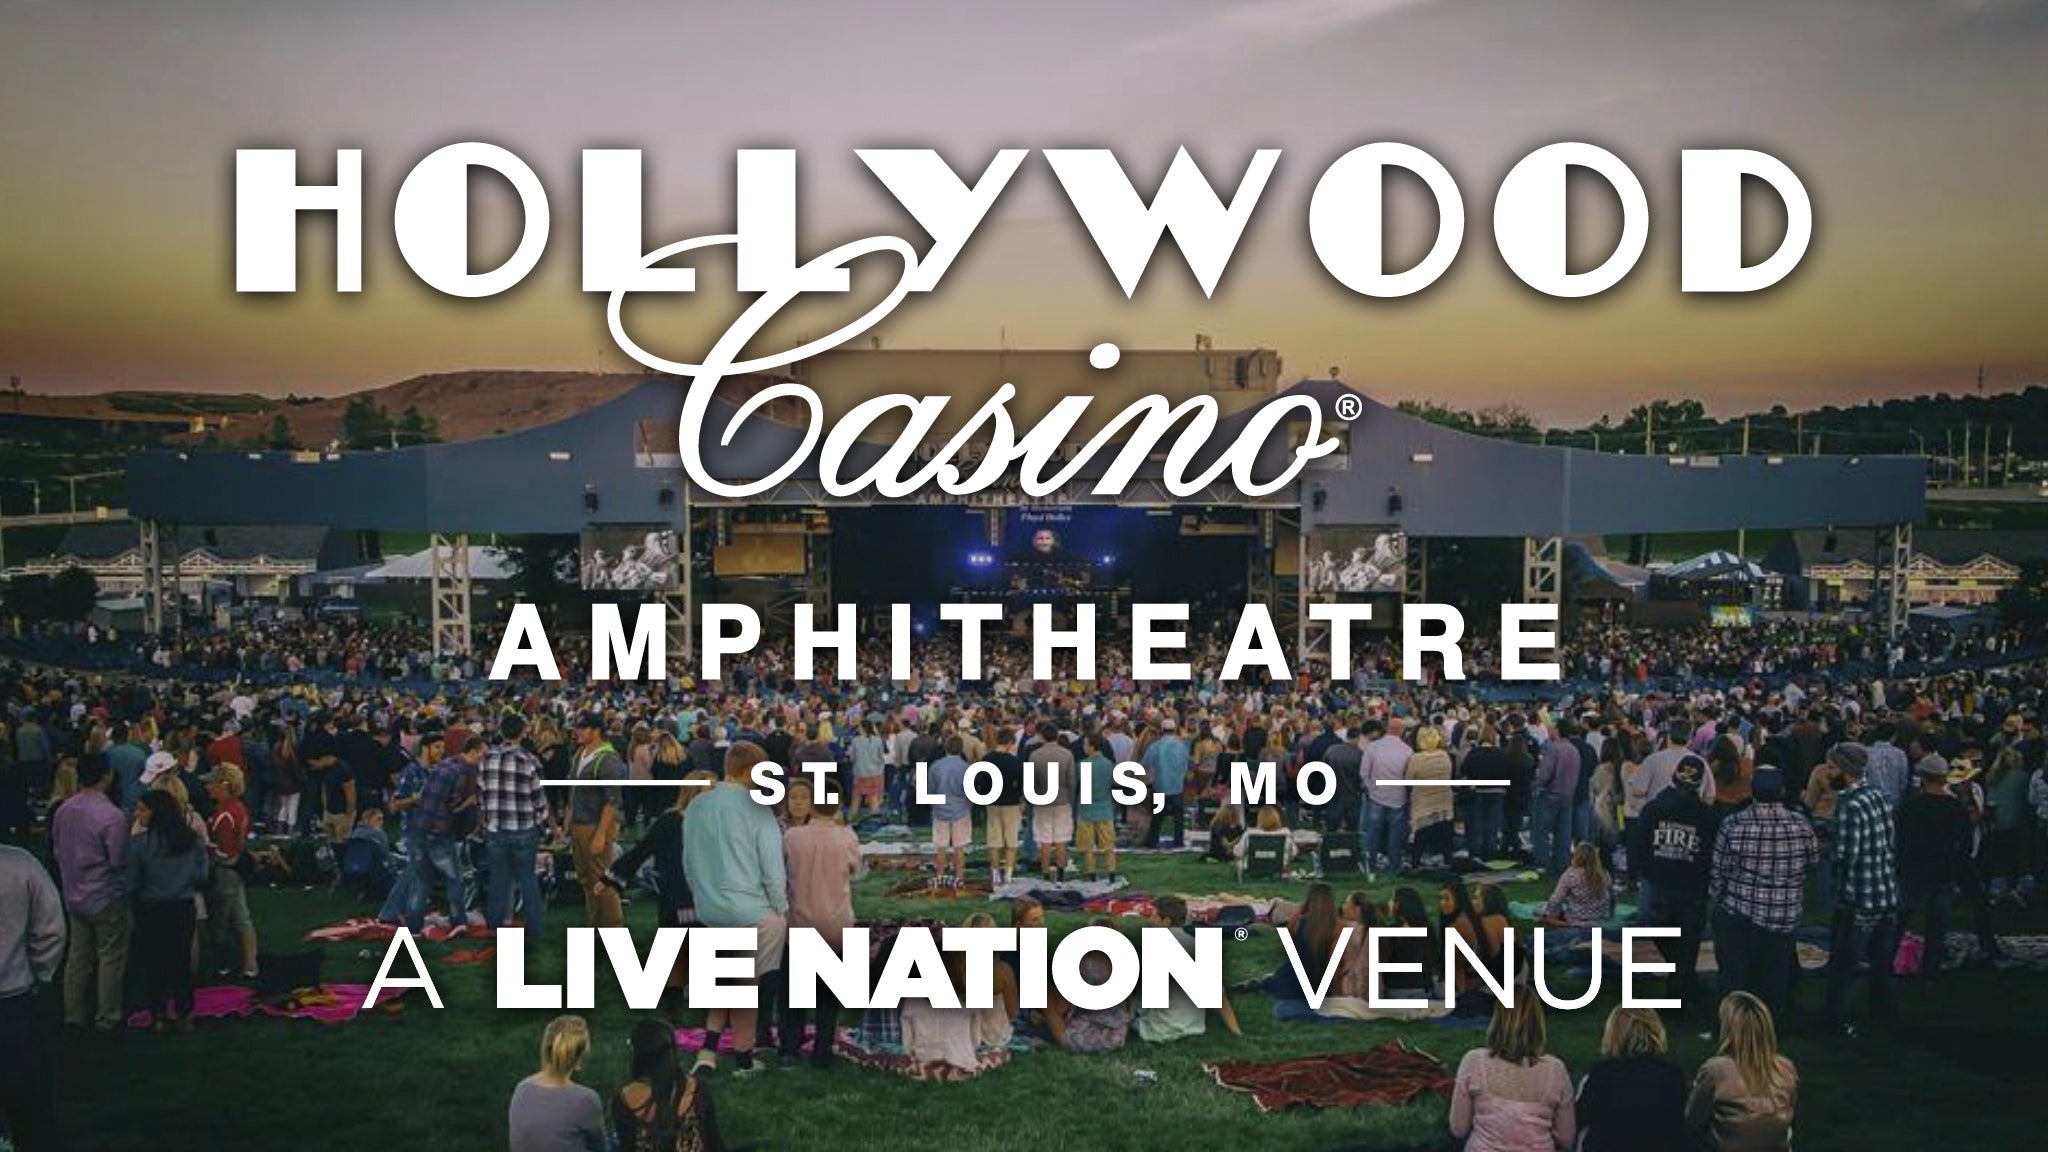 hollywood casino amphitheatre 2019 concerts